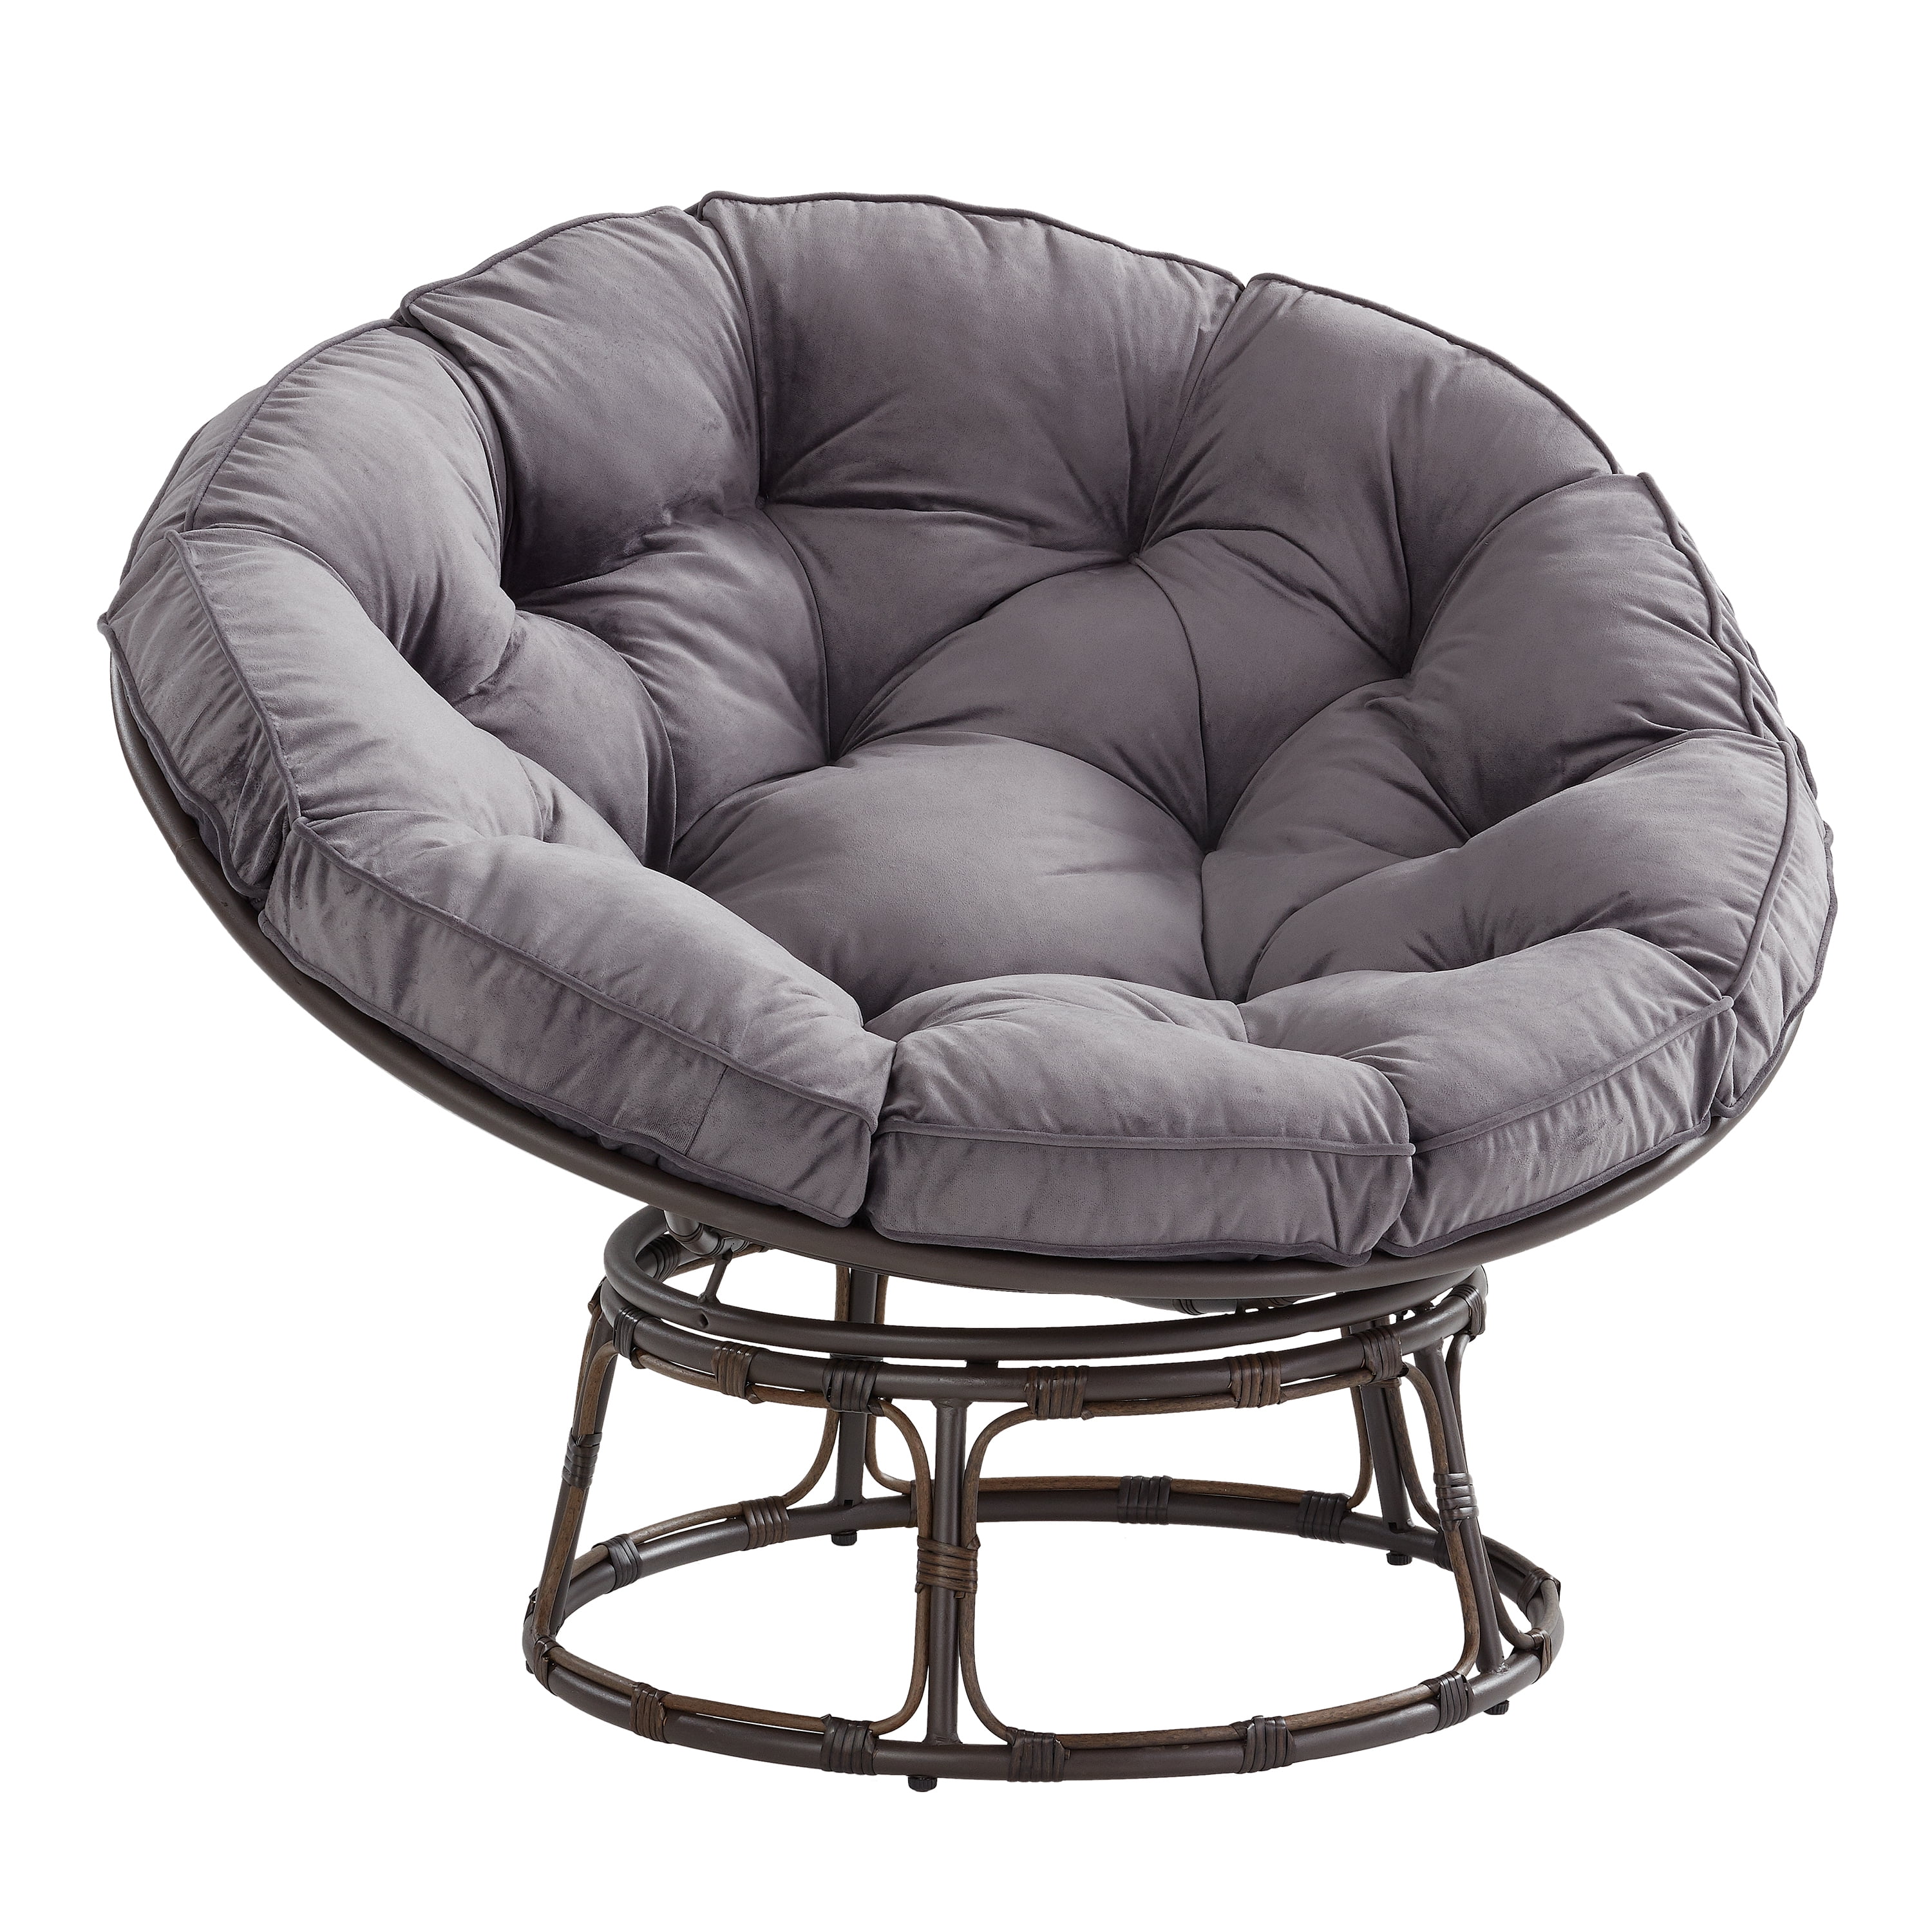 Gray .A 1 Pack Better Homes & Gardens Papasan Chair with Fabric Cushion, 